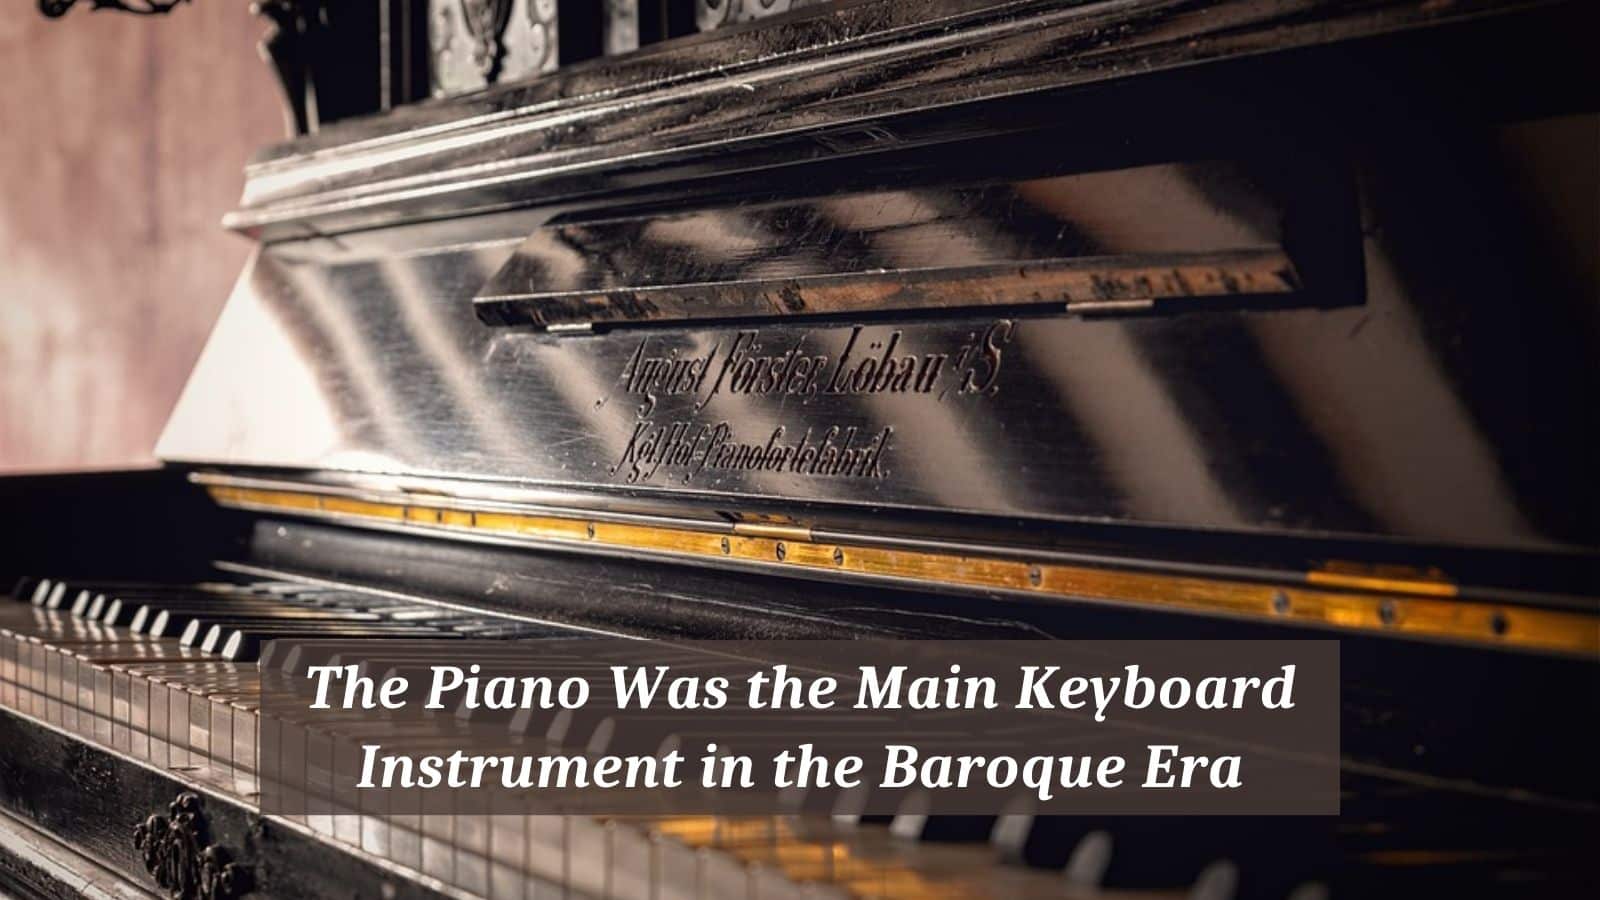 The Piano Was the Main Keyboard Instrument in the Baroque Era